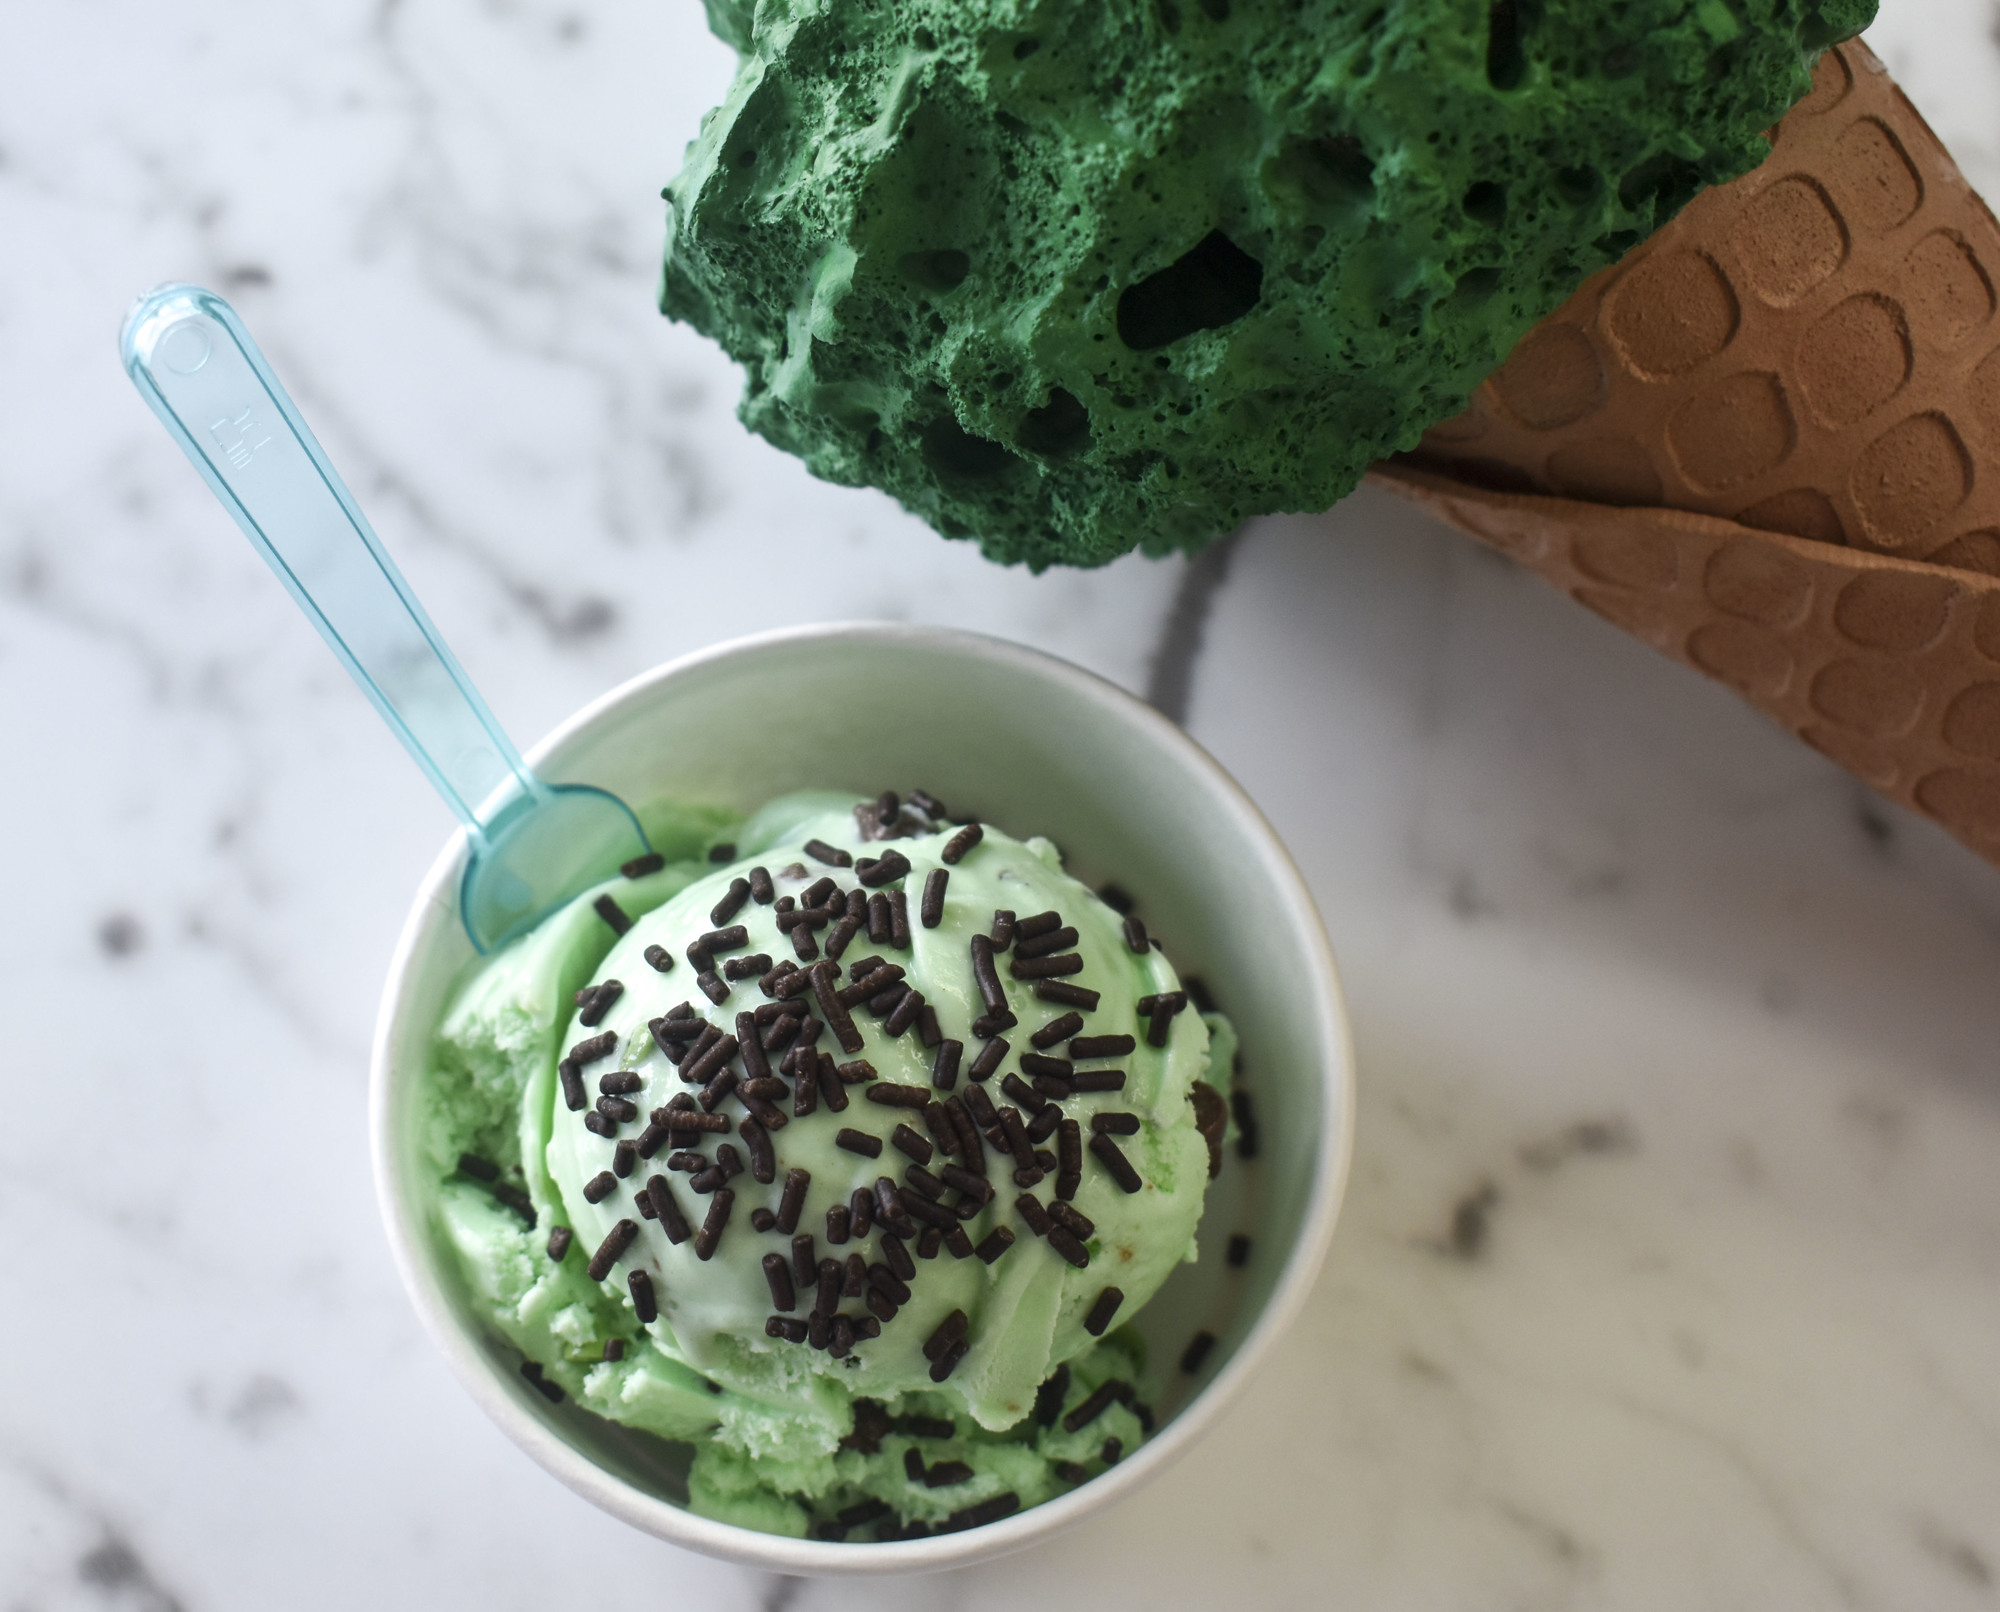 Mint Chocolate Chip ice cream is one of the many homemade flavors offered by Siesta Key Creamery.